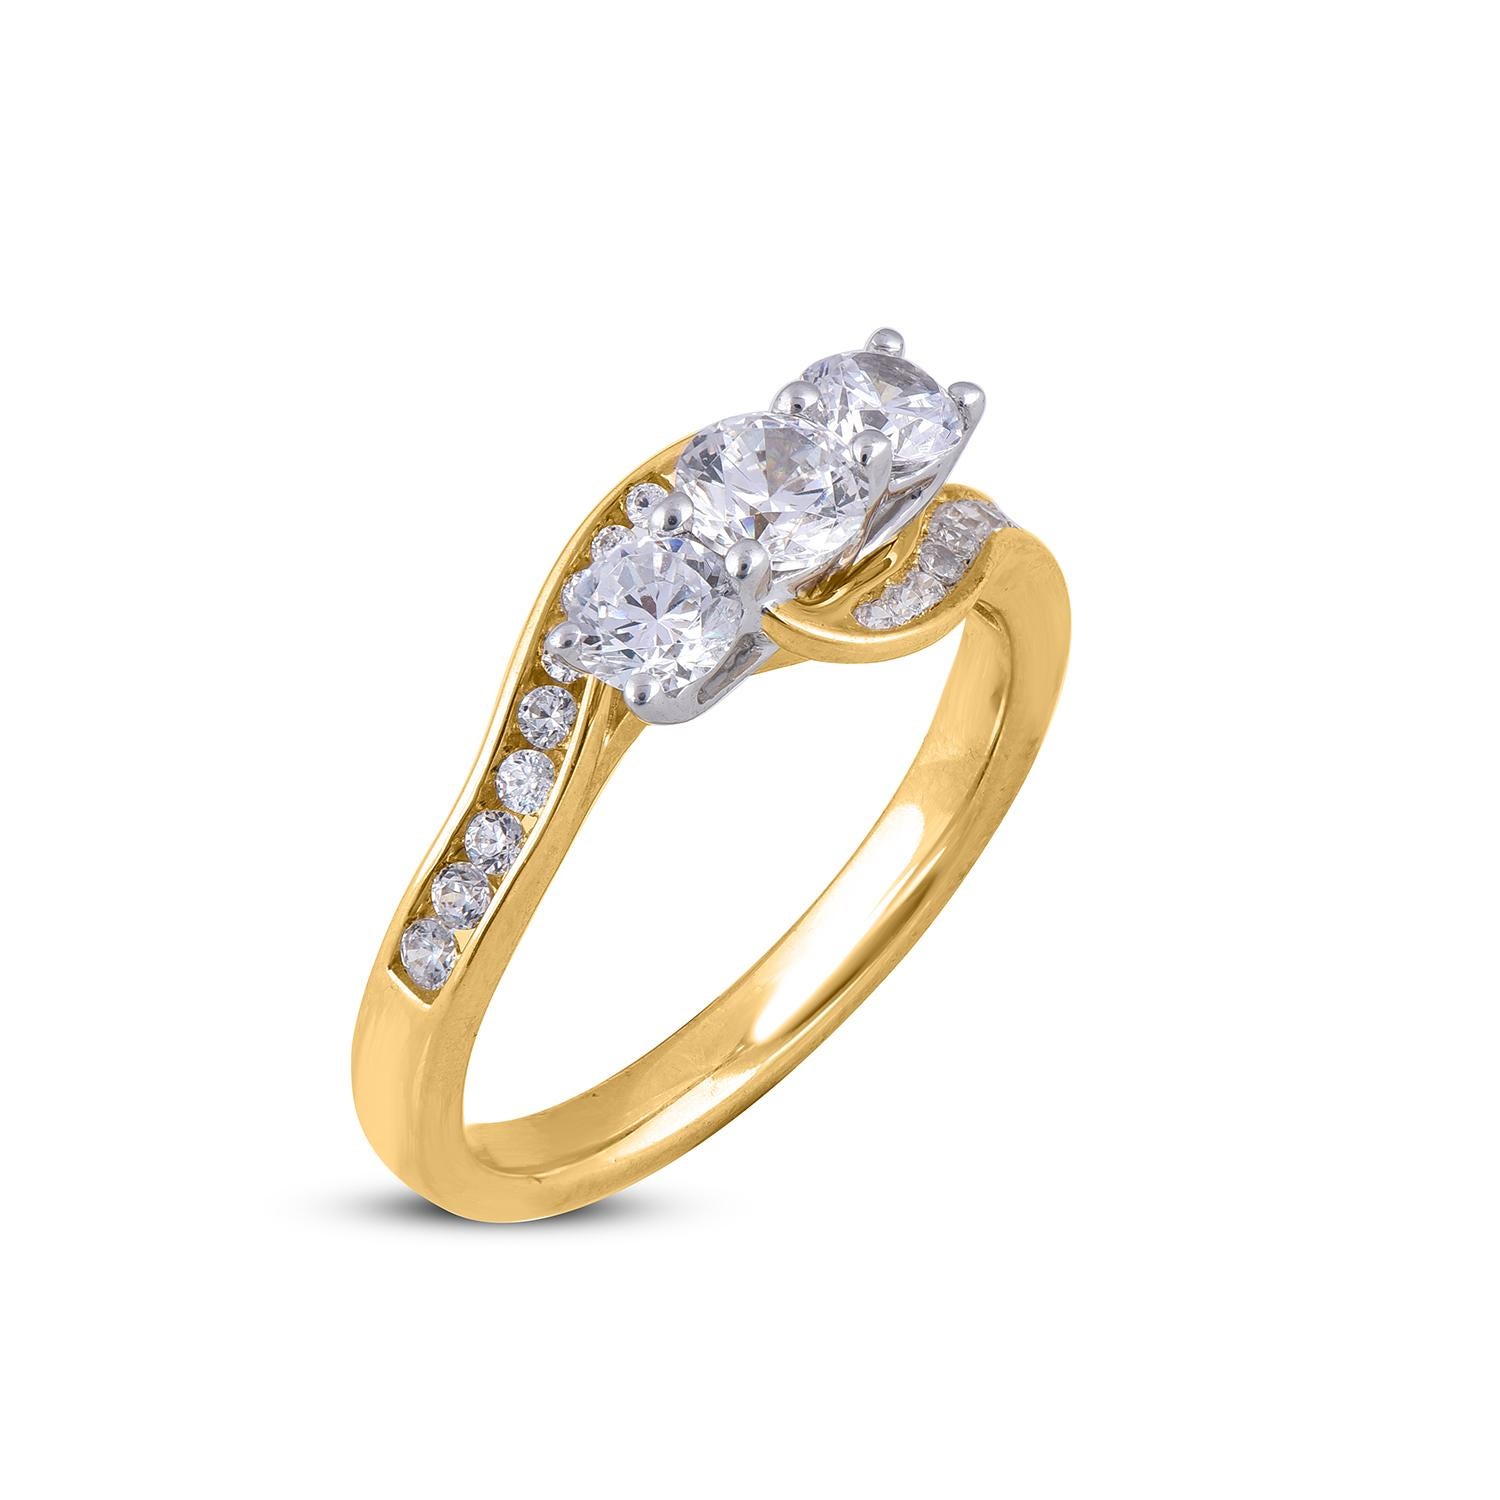 Ask for her hand with this exquisite diamond engagement ring crafted in 18 Karat Yellow gold, this modern design features a trio of shimmering Round diamonds. Additional diamonds line the contemporary twist shank, 21 round diamond set in prong and